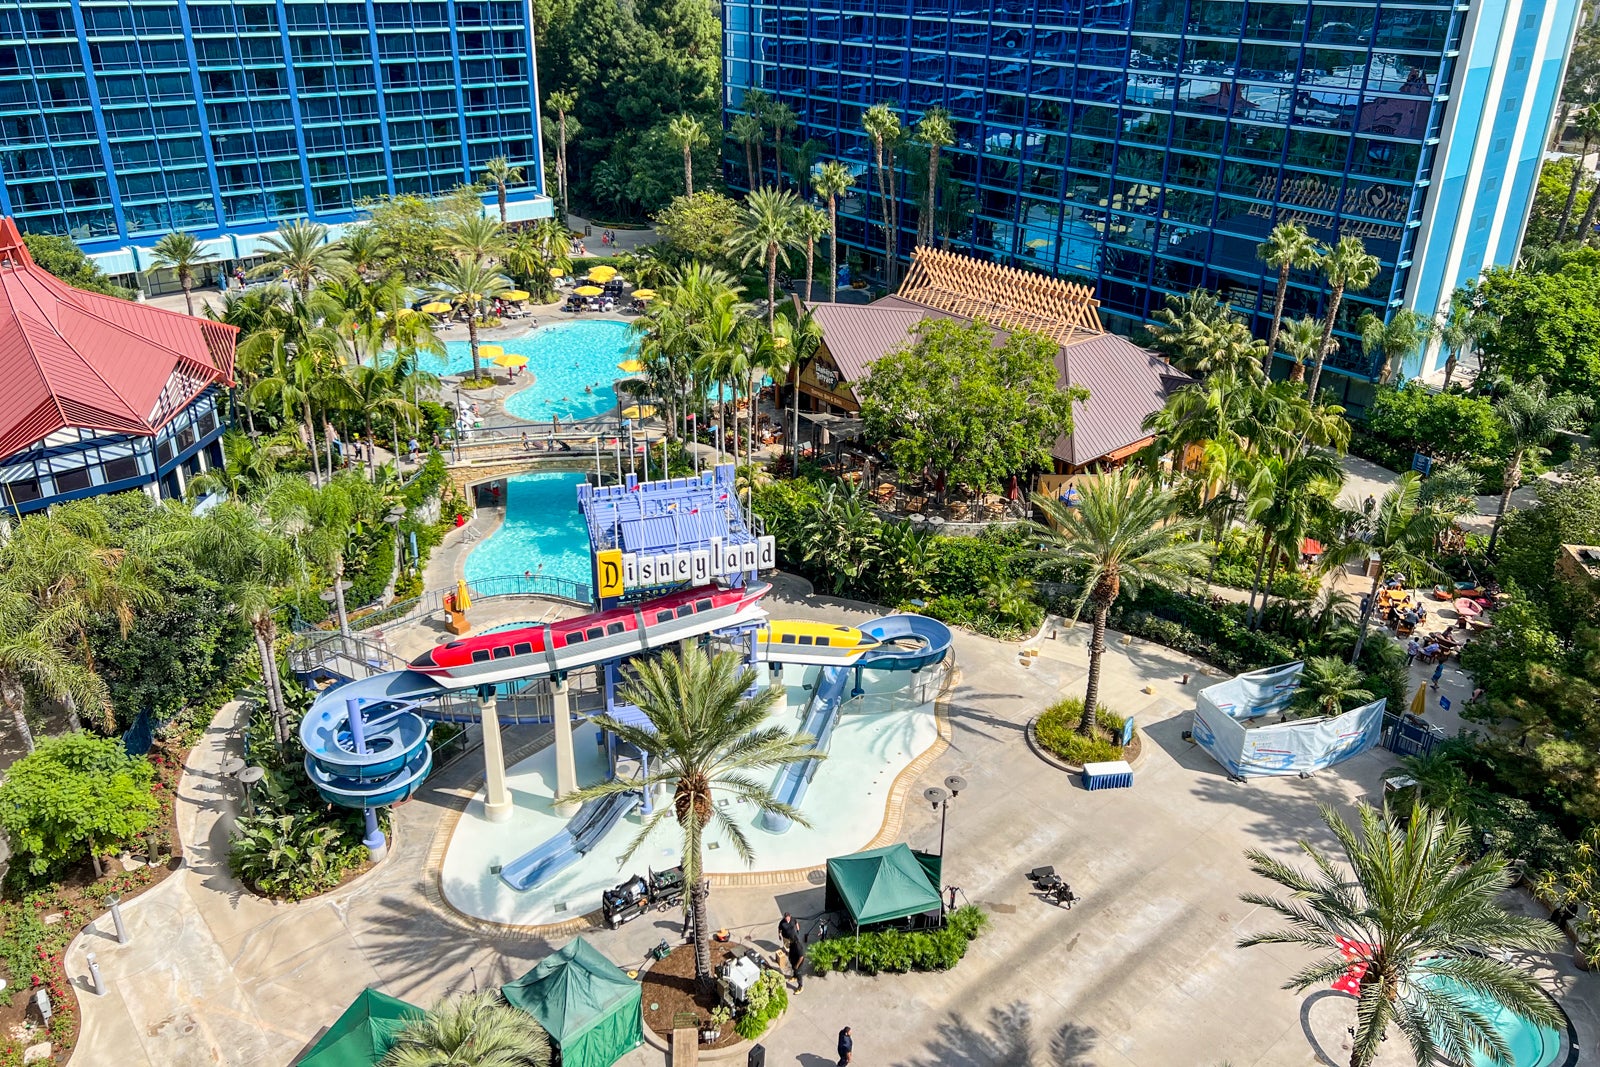 Stay Across from Disneyland at the Howard Johnson Anaheim